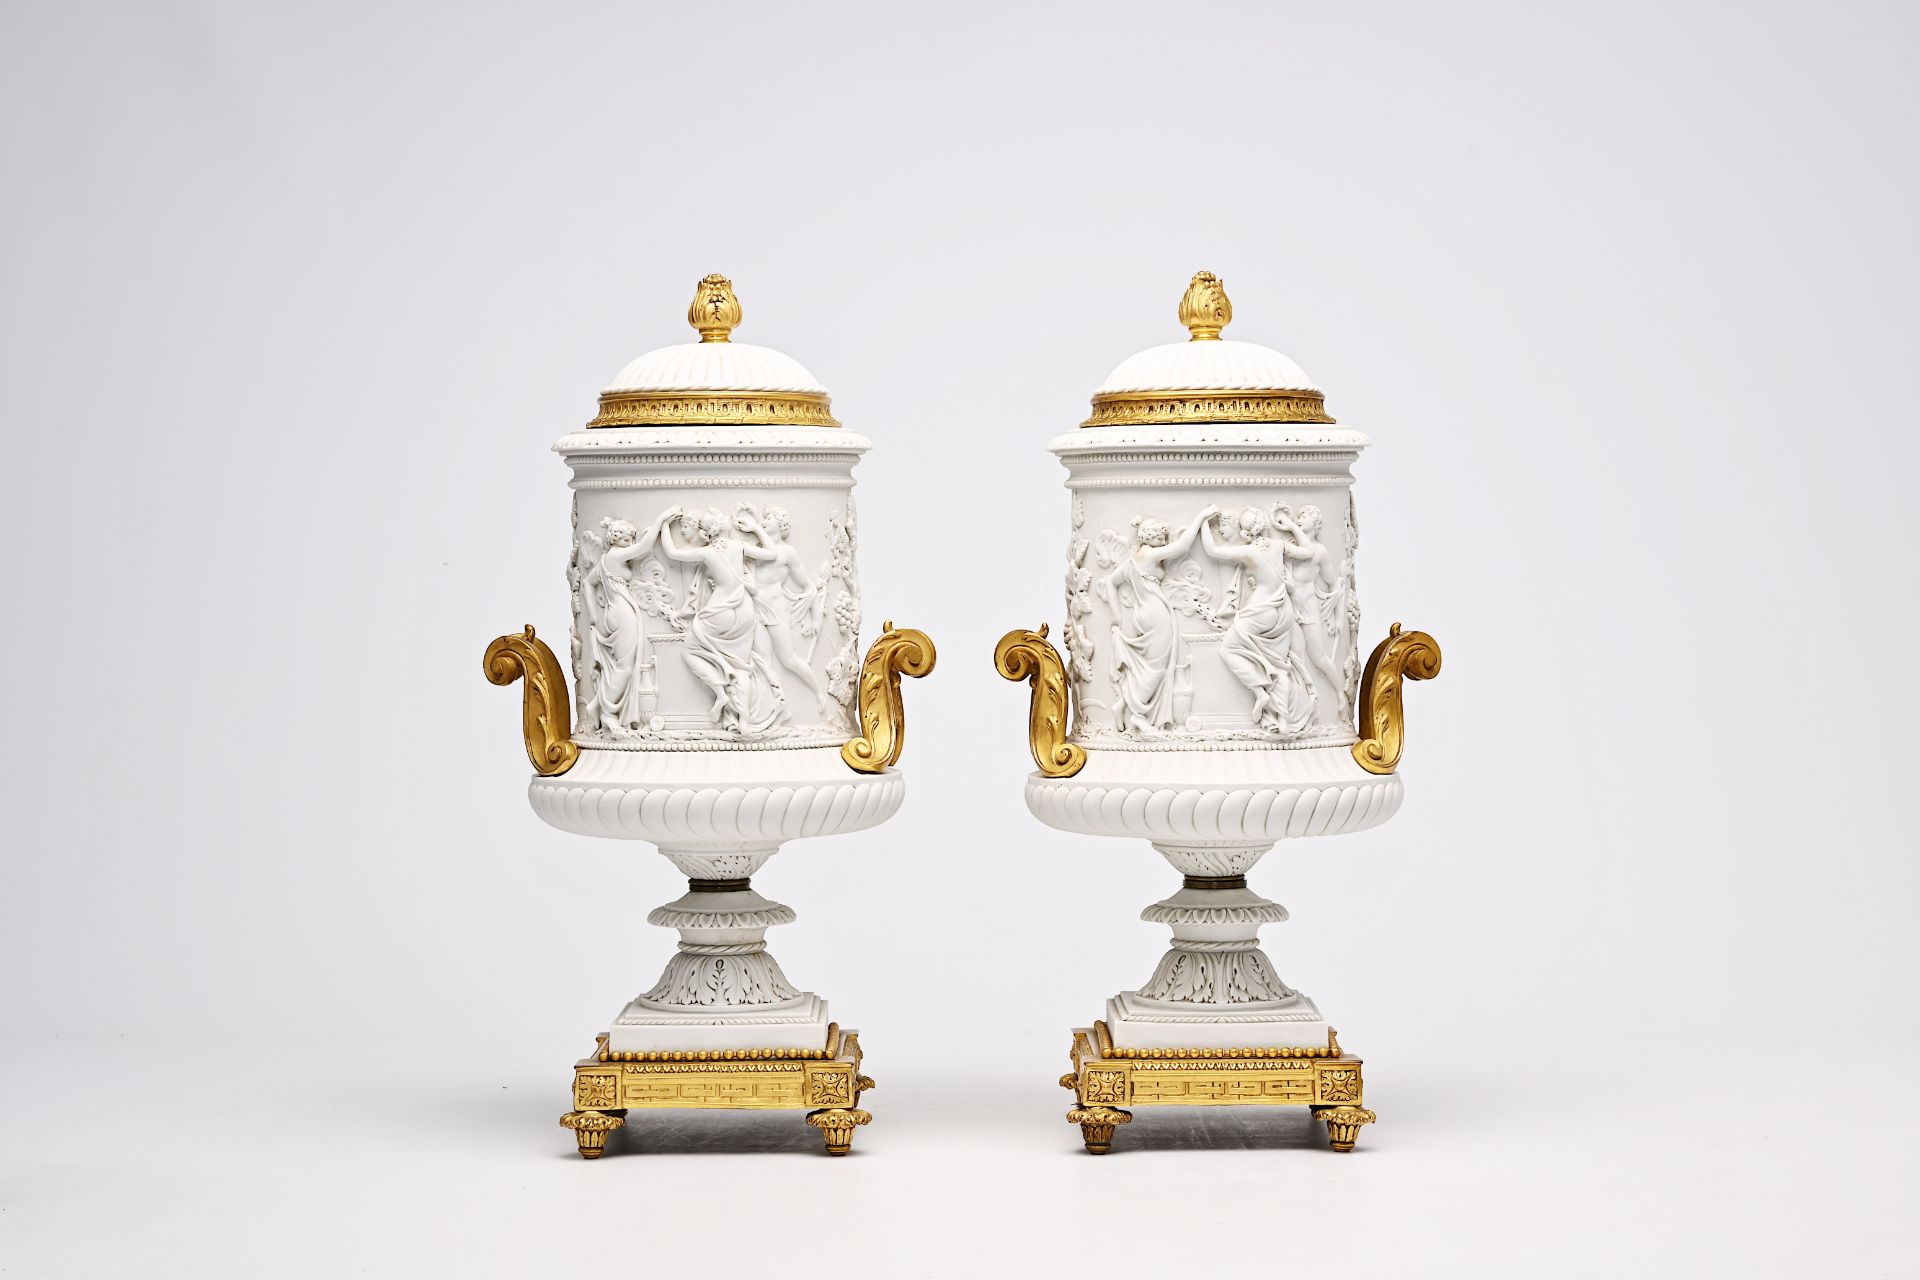 A pair of French biscuit gilt bronze mounted vases and covers with a frieze with bacchantes, Sevres